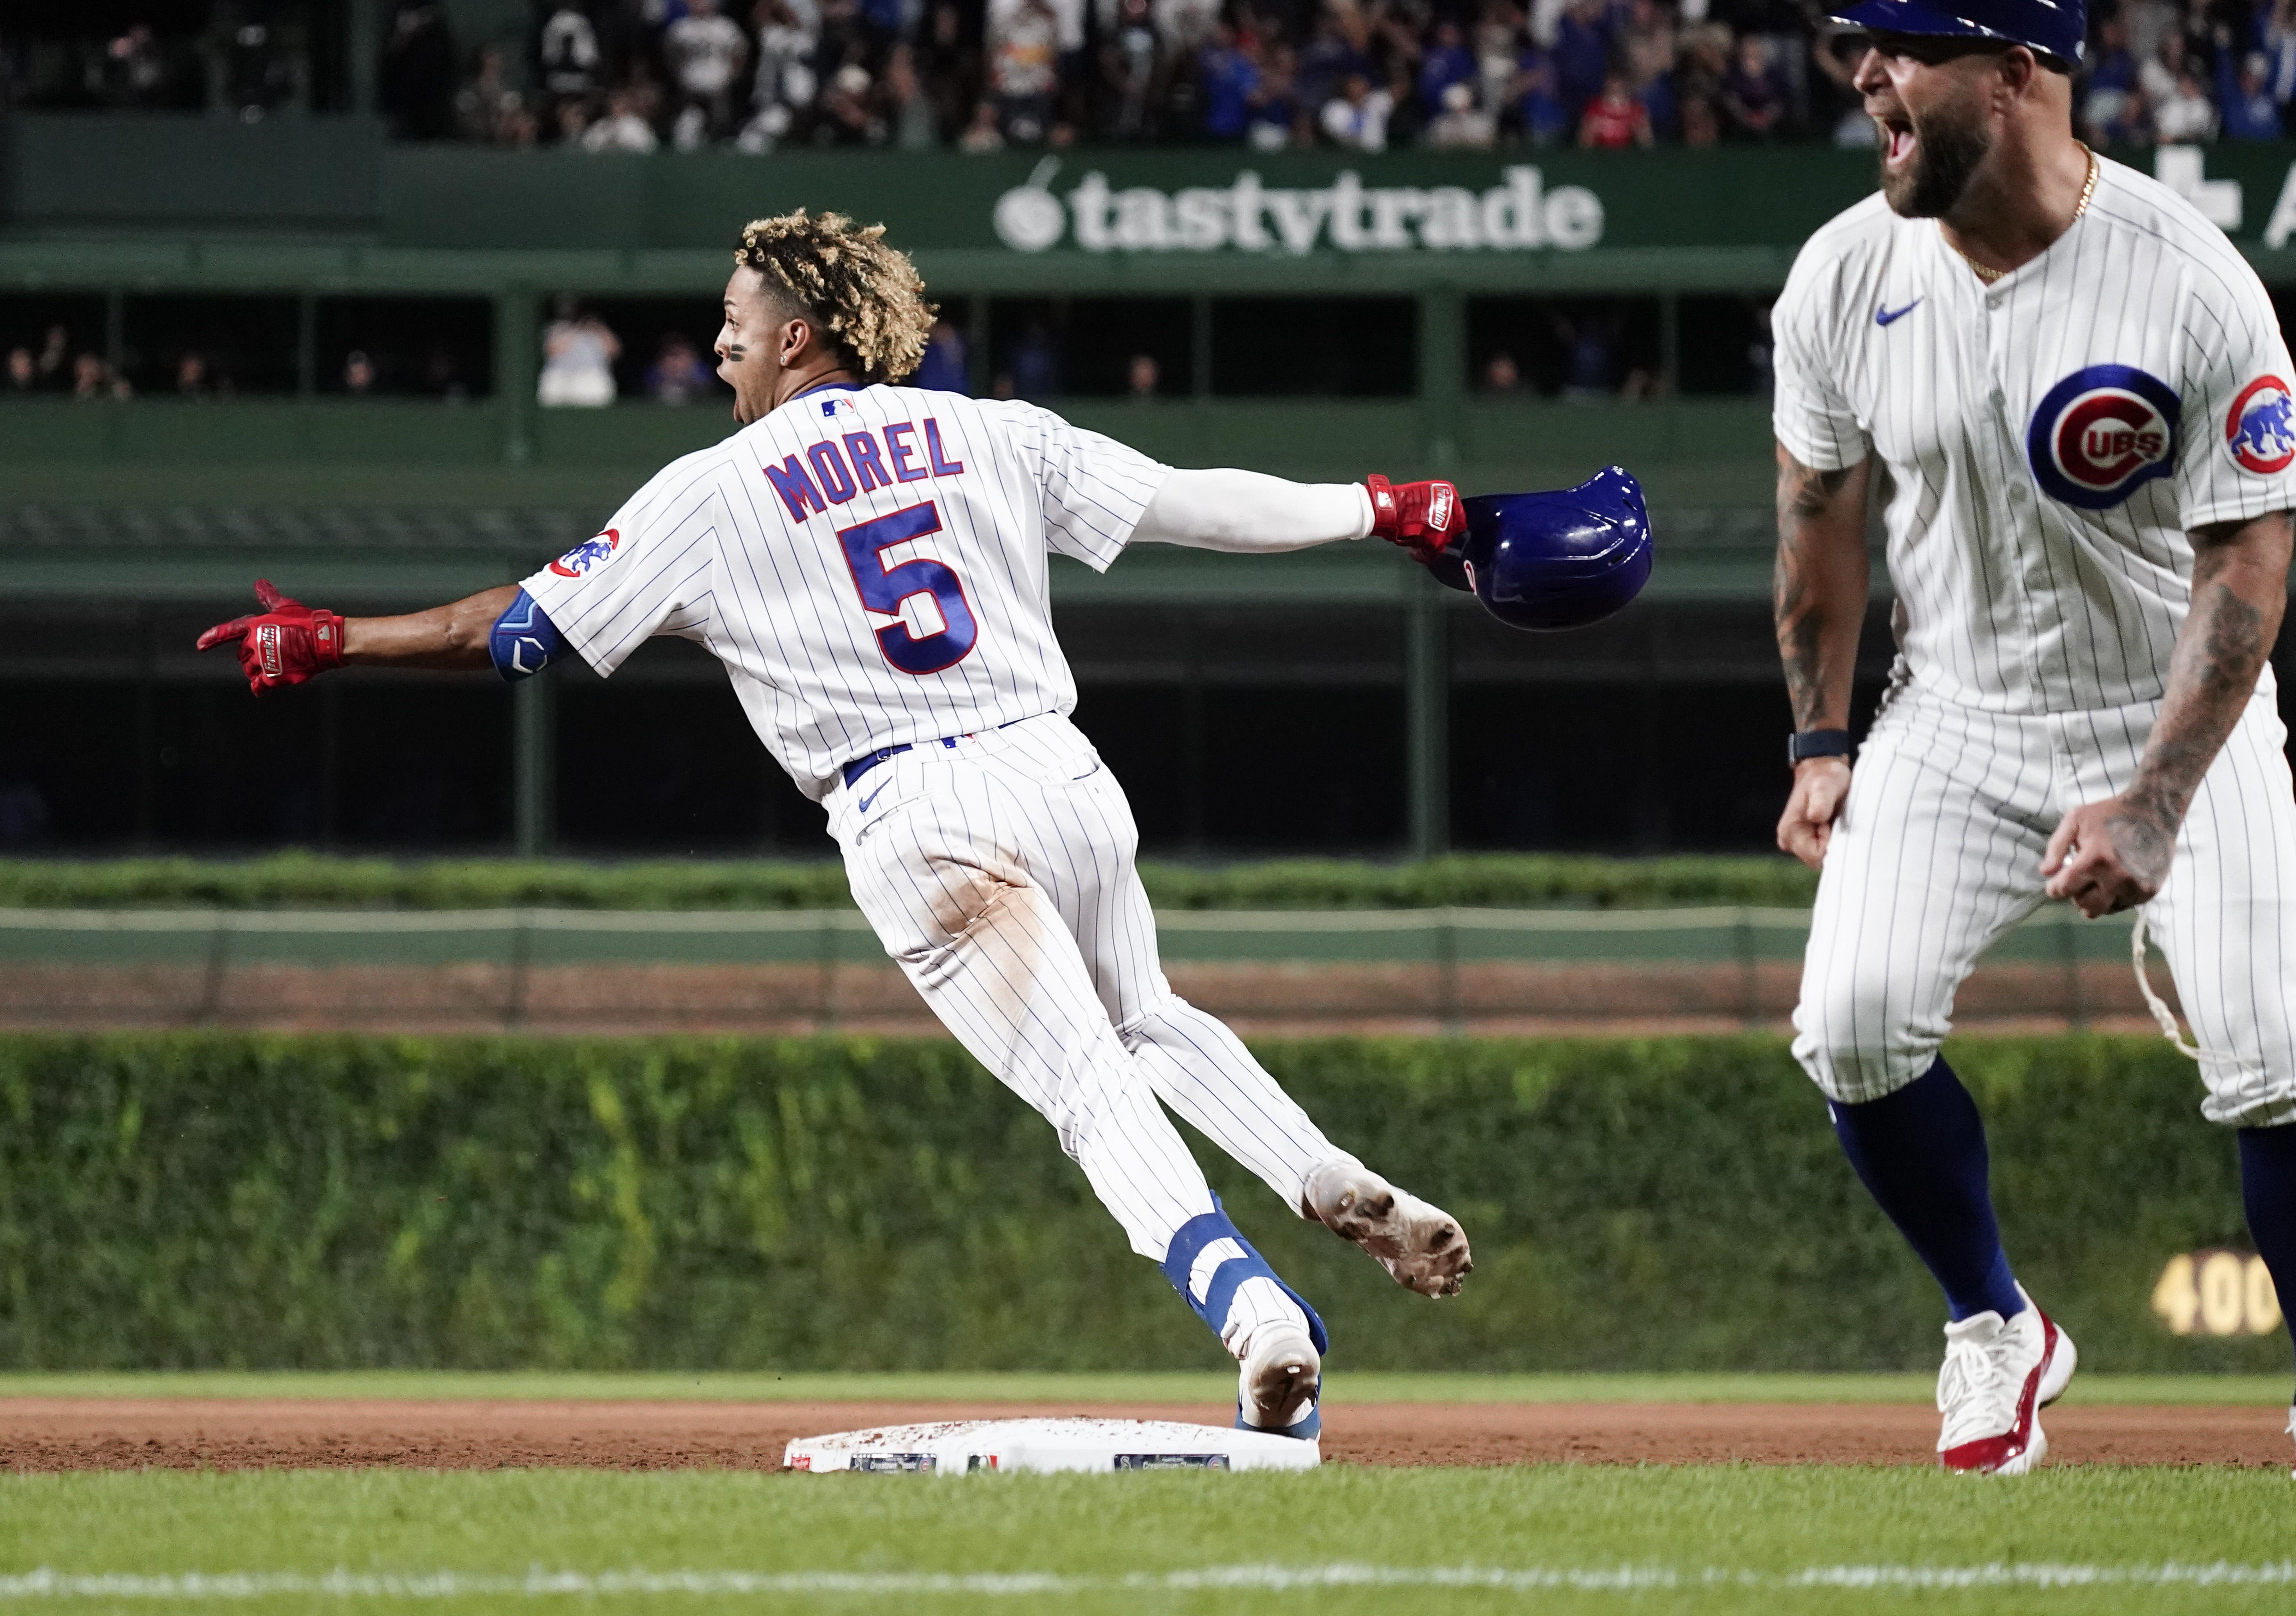 Cubs rally past White Sox at Wrigley